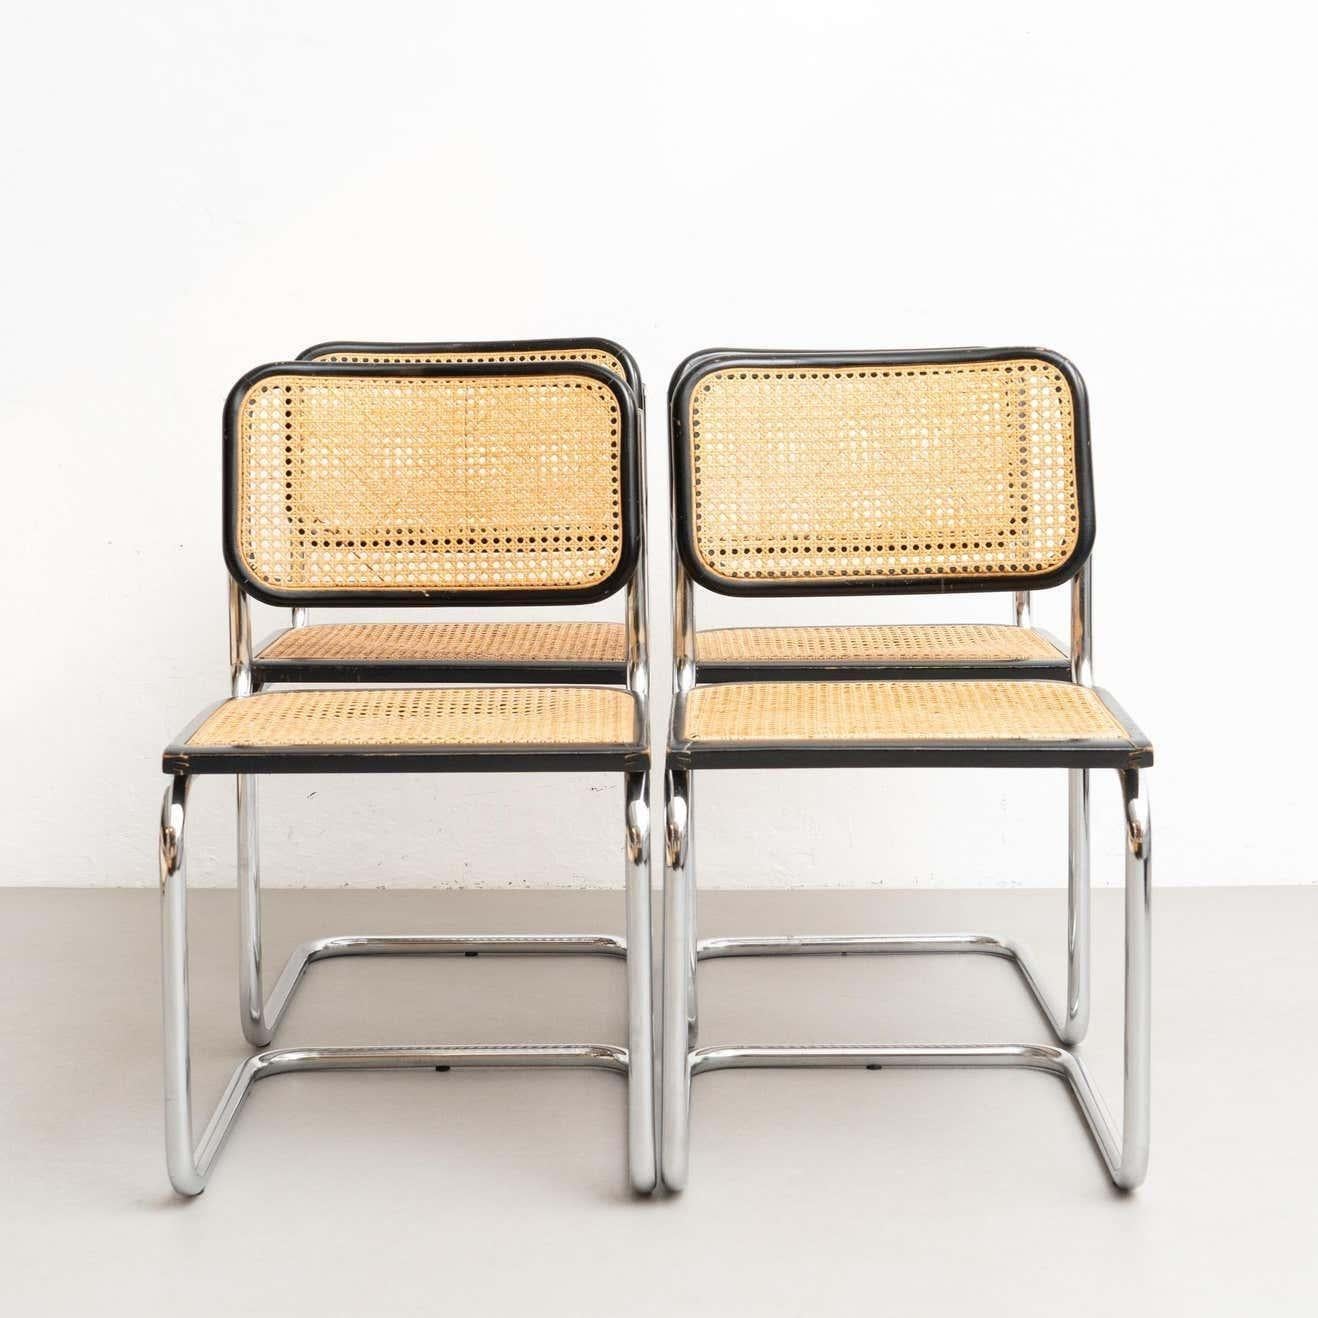 Set of 4 Marcel Breuer Cesca Metal and Wood Mid-Century Modern Chairs, c 1960 For Sale 4